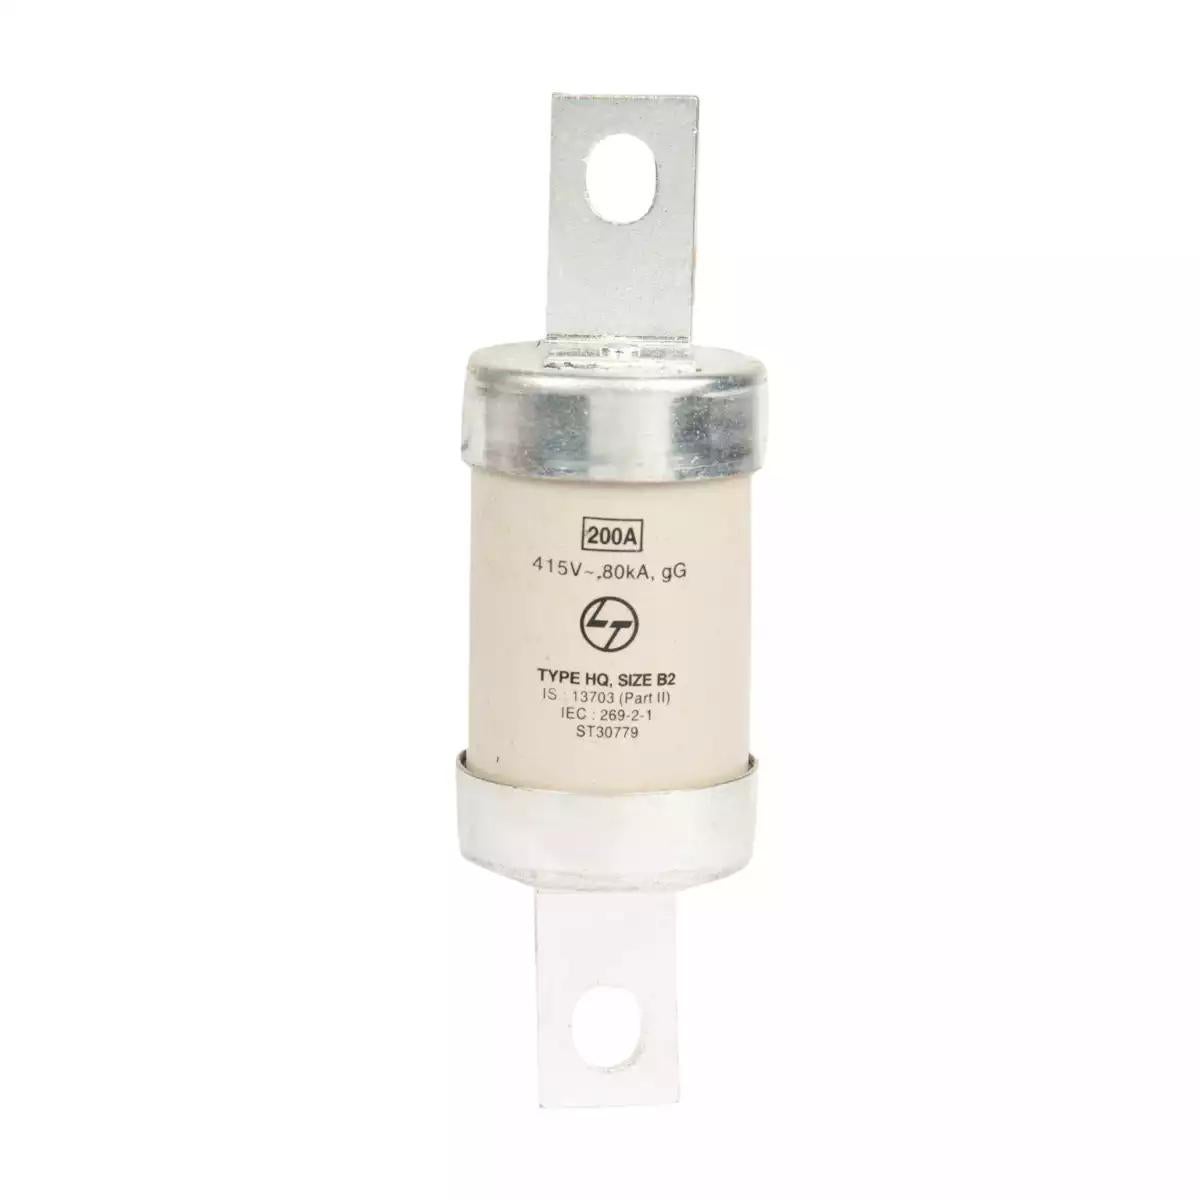 HQ Bolted HRC fuse 125A 415V AC Size B2